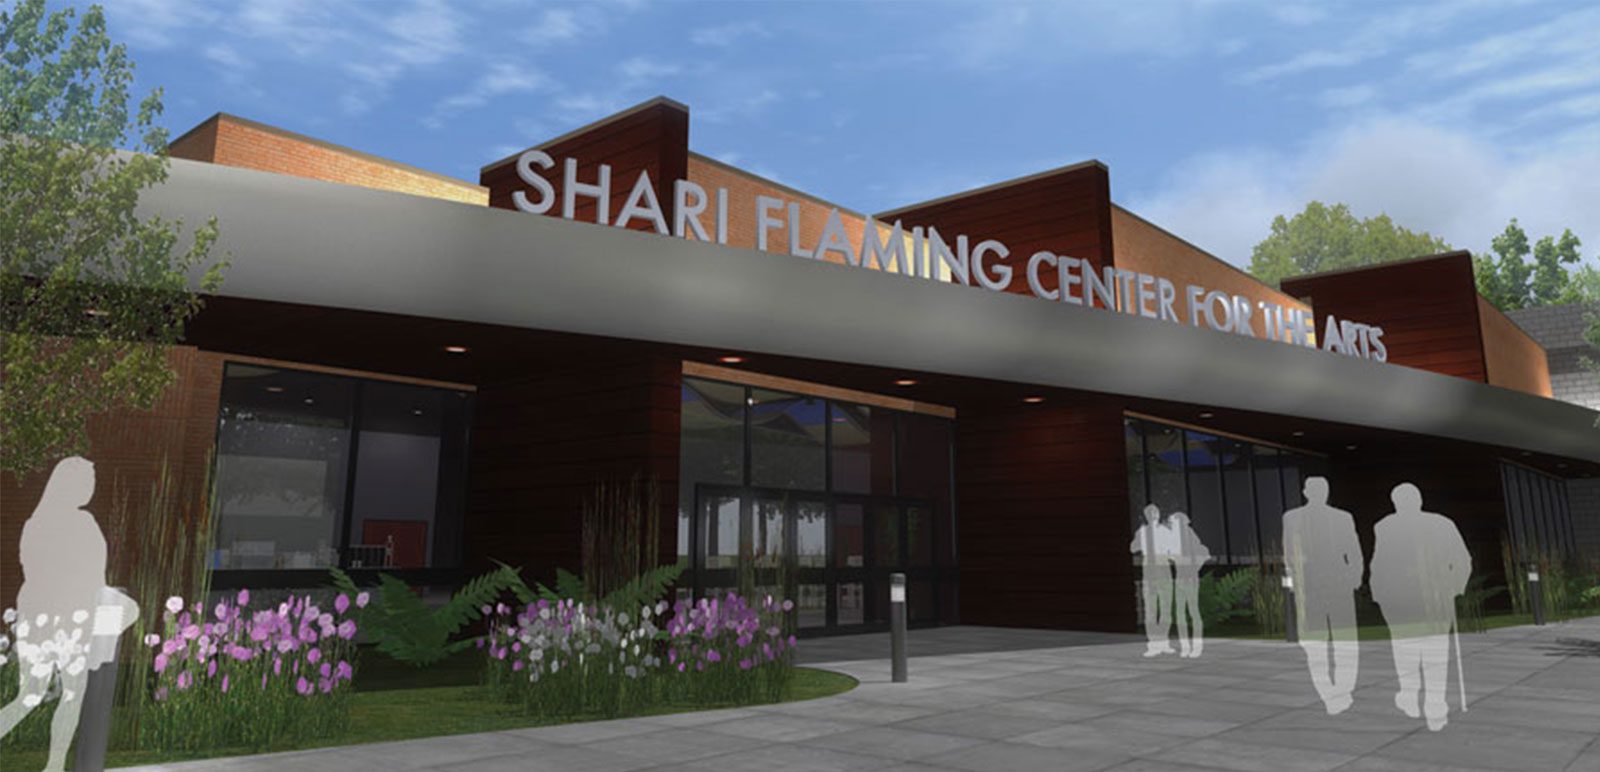 Shari Flaming Center for the Arts building animation